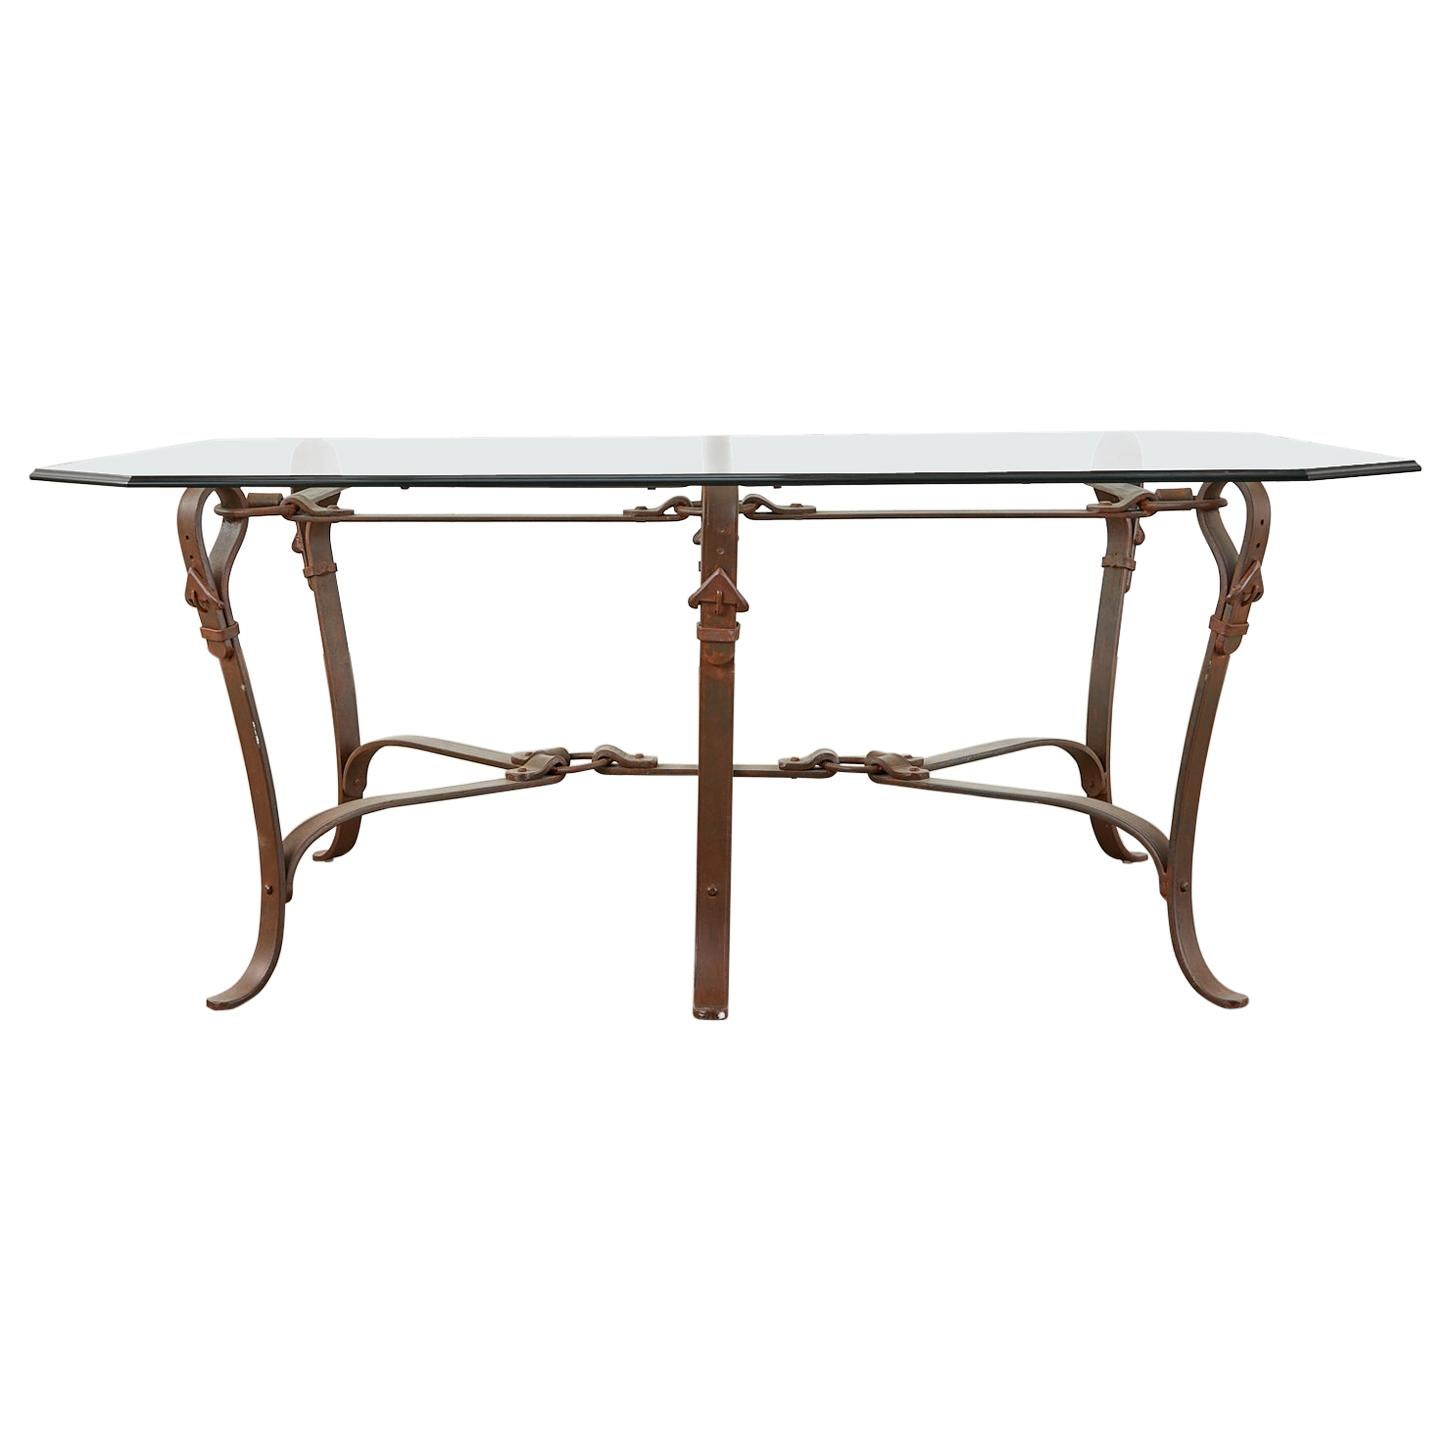 Adnet Hermes Style Faux Leather Iron Strap Cocktail Table For Sale